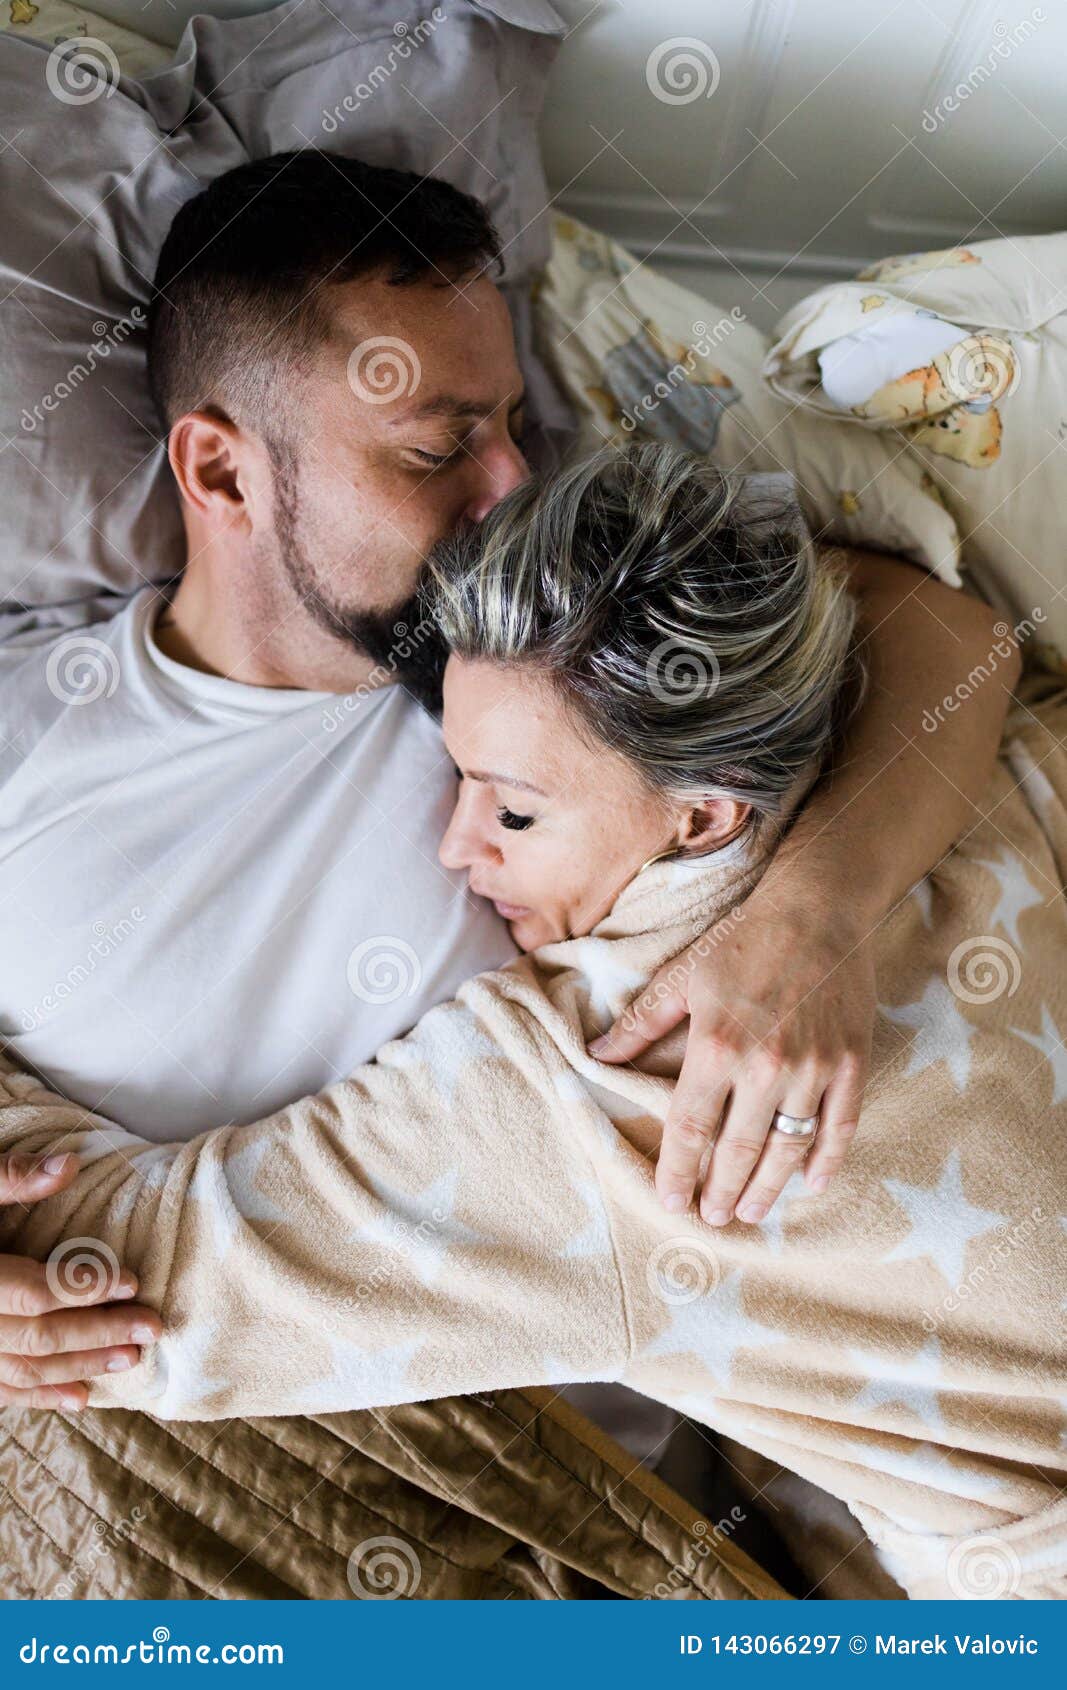 Husband and Wife Sleeping Together in One Bed - in Hug Stock Image ...